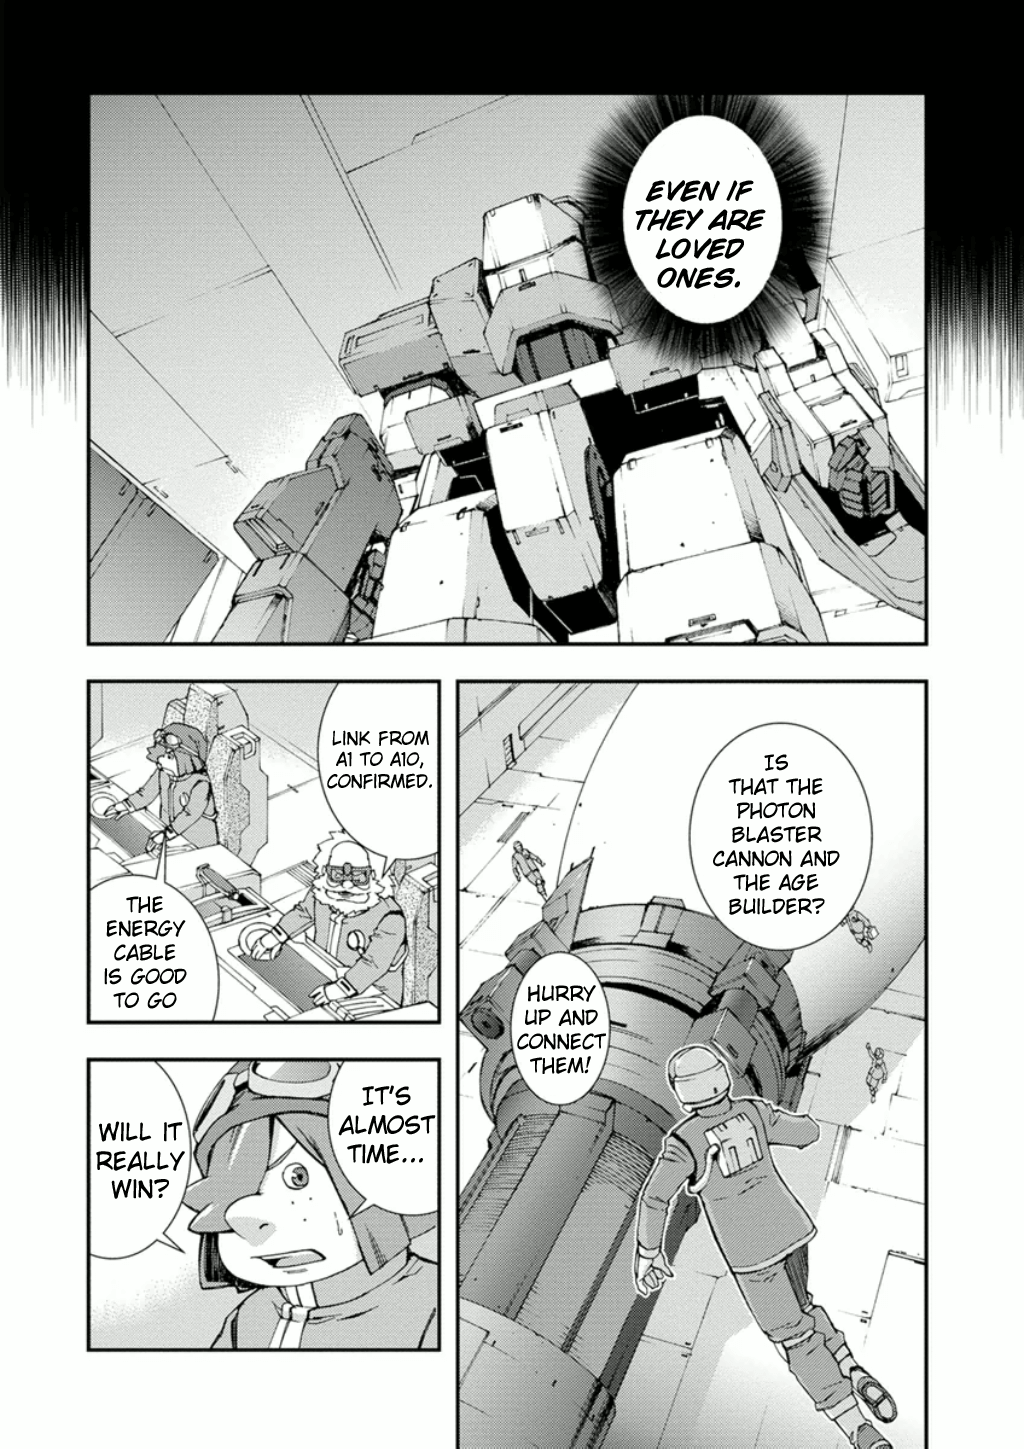 Mobile Suit Gundam AGE: First Evolution Vol.3 Chapter 9: Ambat the Space Fortress